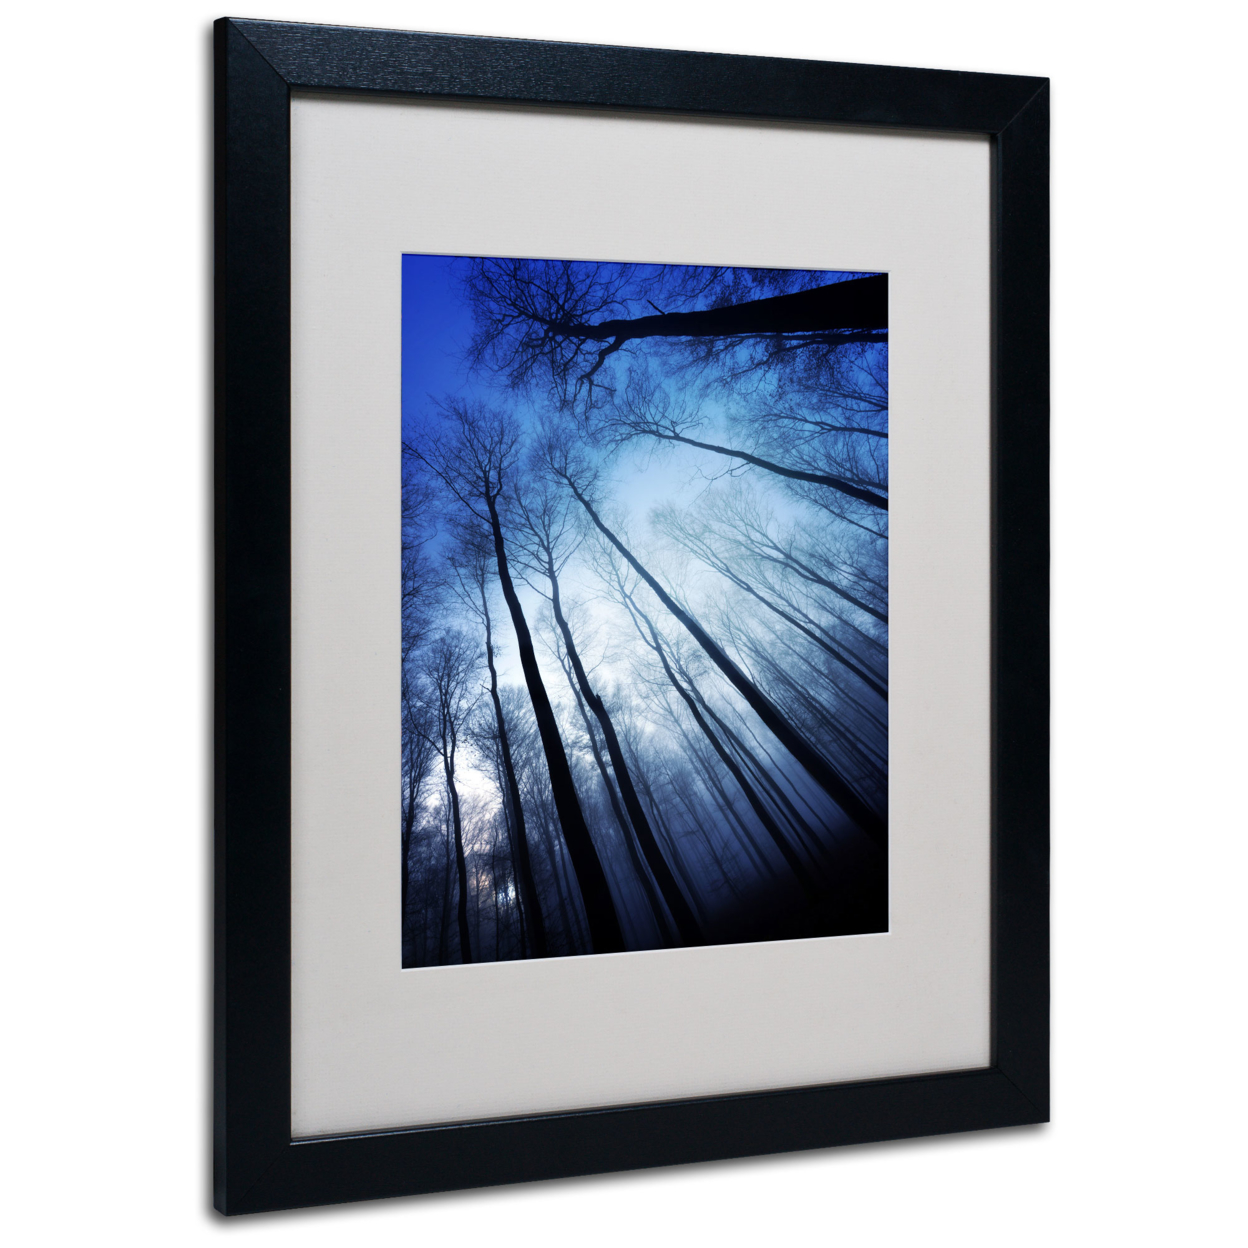 Philippe Sainte-Laudy 'Blue Forest' Black Wooden Framed Art 18 X 22 Inches